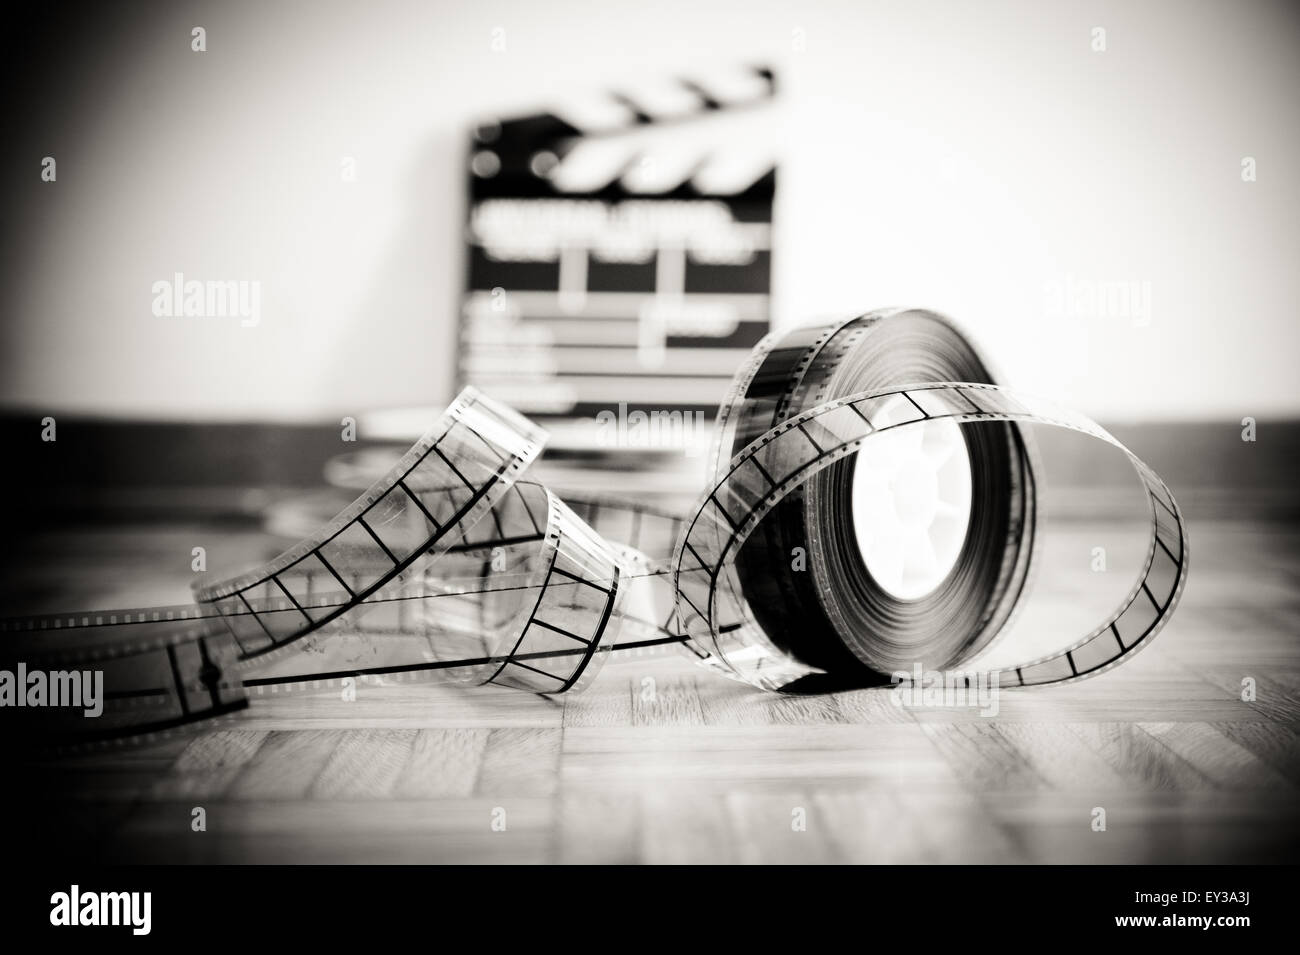 35 mm cinema film reel and out of focus movie clapper board in background  on wooden floor in vintage black and white Stock Photo - Alamy